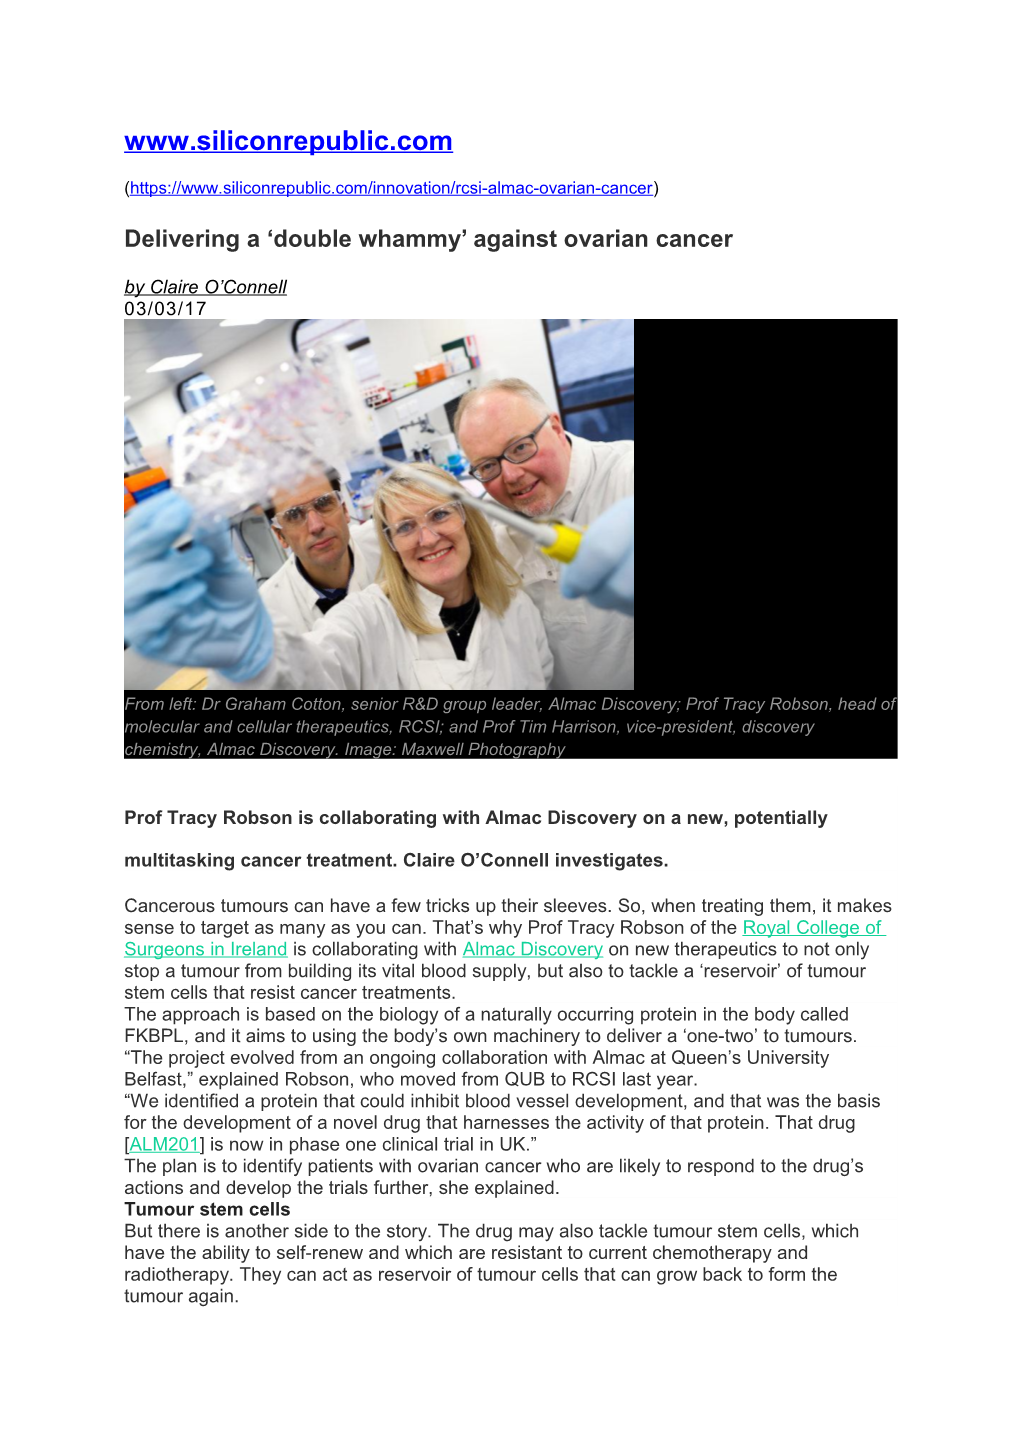 Delivering a Double Whammy Against Ovarian Cancer